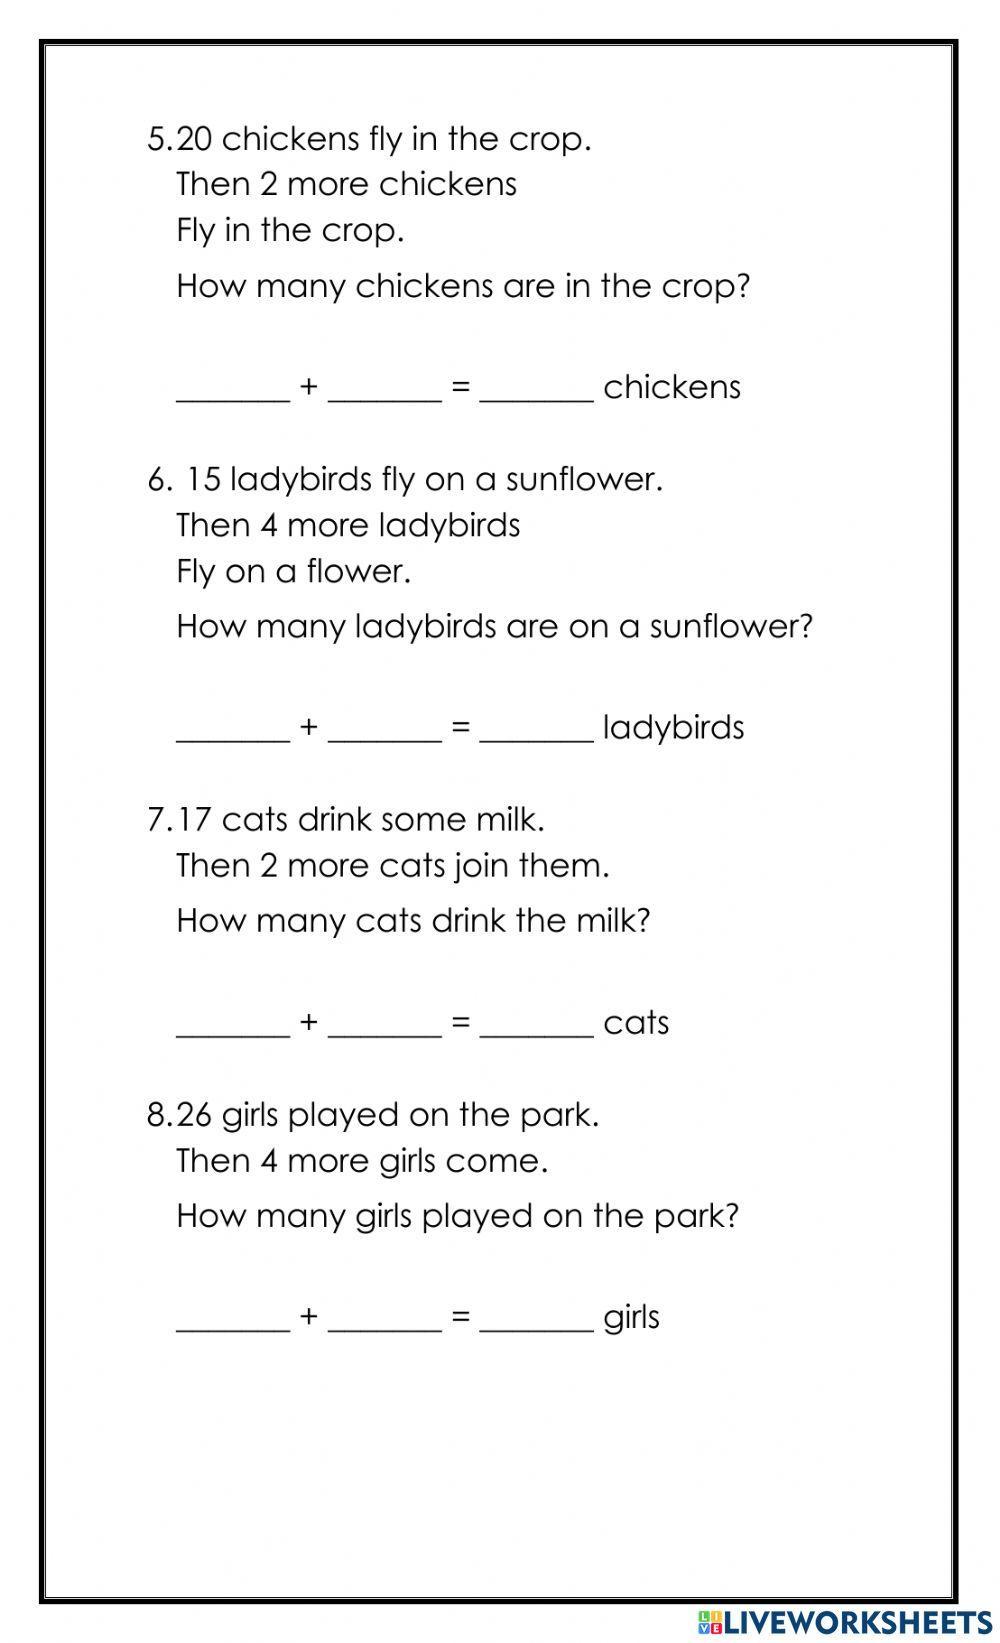 Expanded form word problems